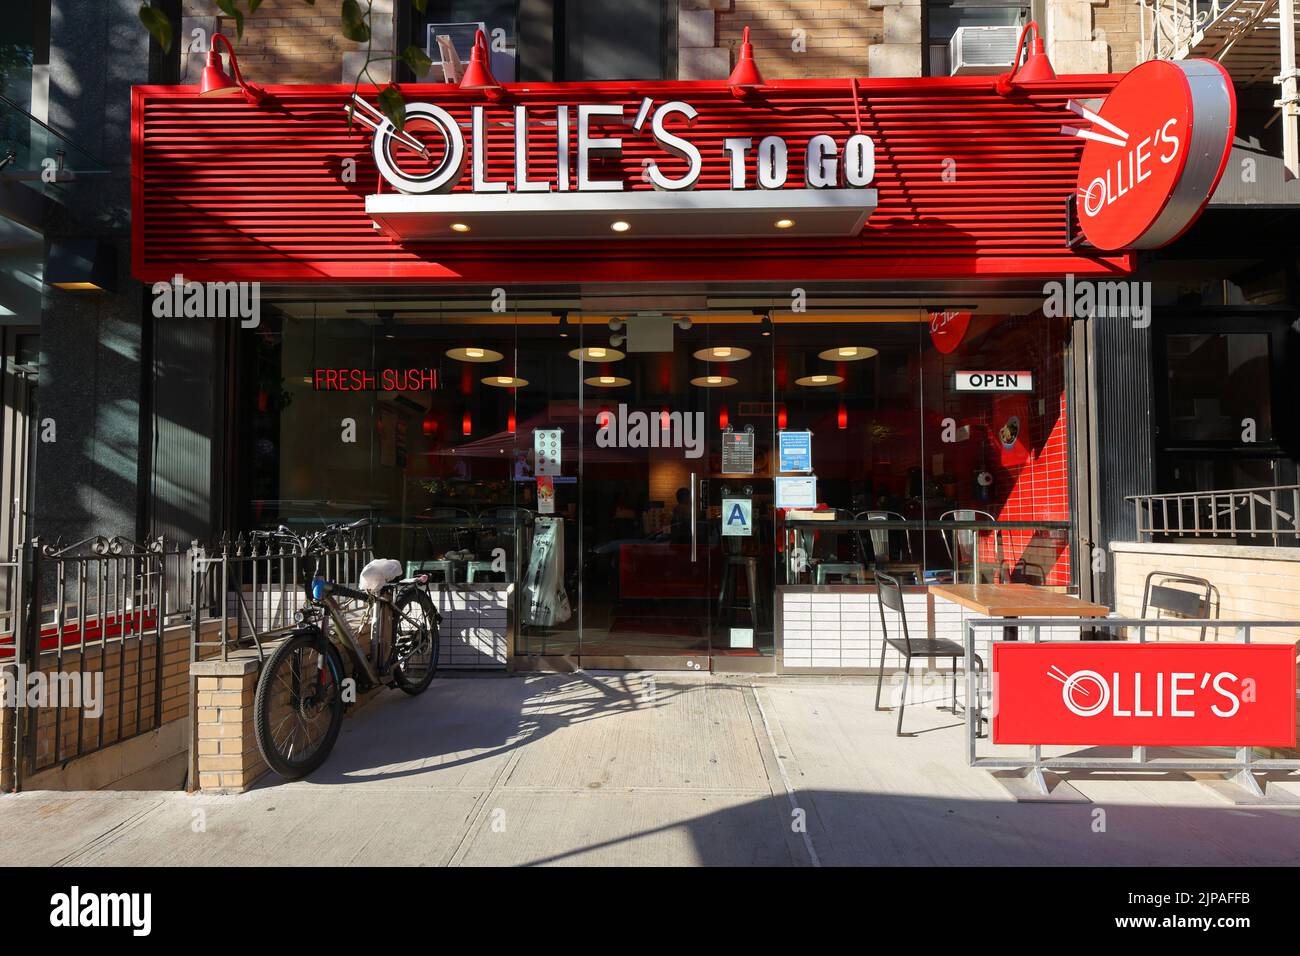 Ollie's To Go, 307 E 77th St, New York, NYC storefront photo of a Chinese restaurant in Manhattan's Upper East Side neighborhood. Stock Photo